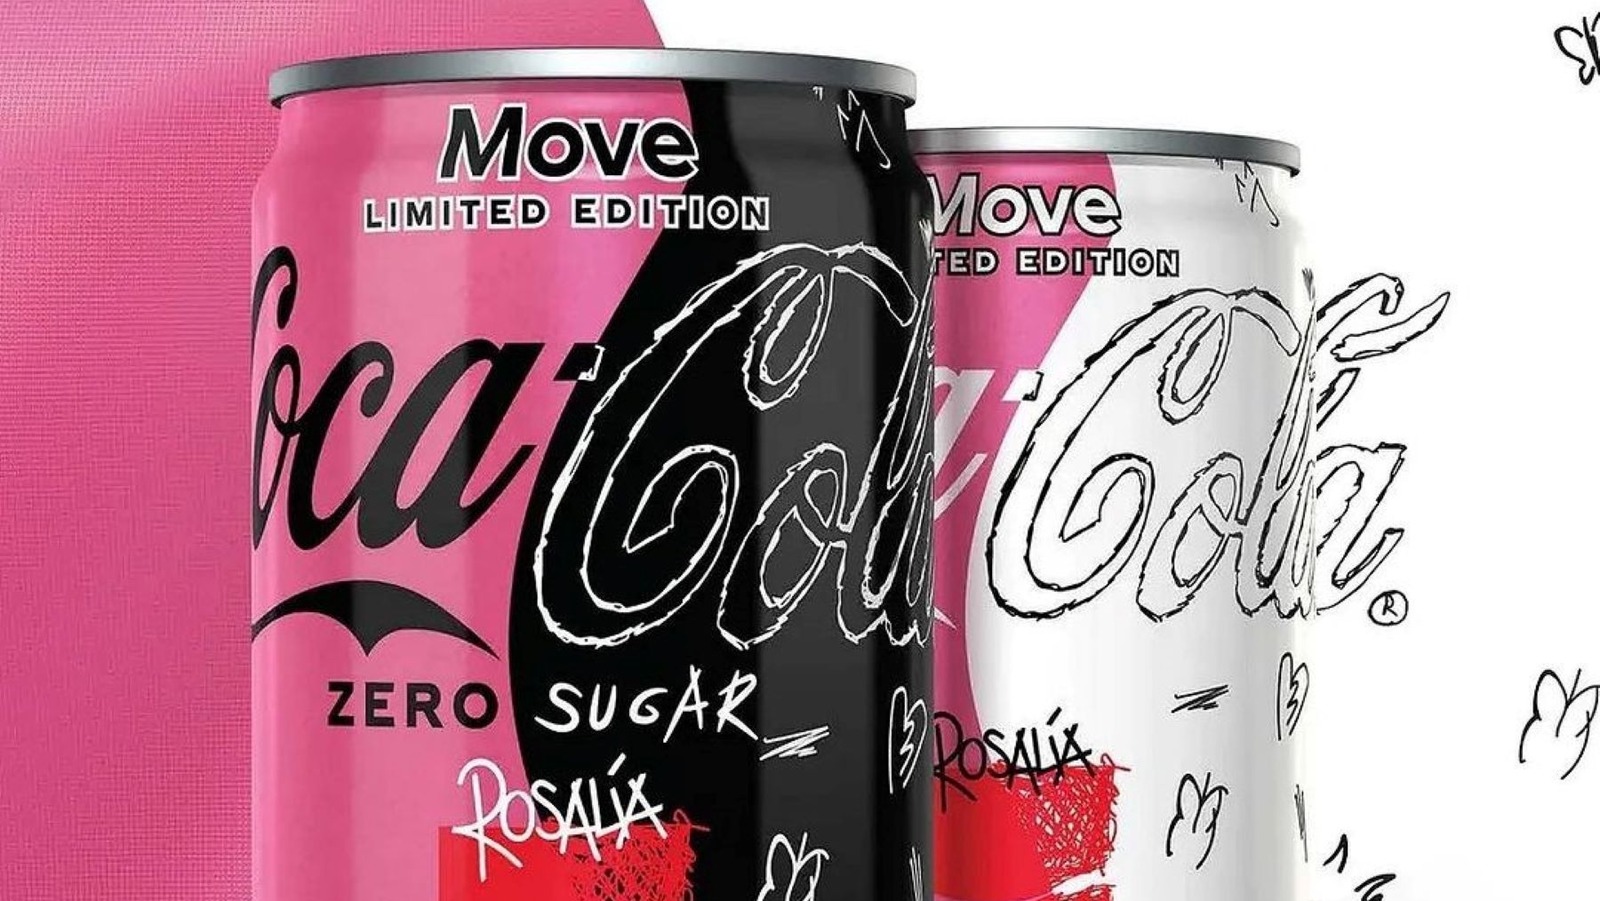 Coke Has a Brand-New Flavor, and It's Not What We Expected